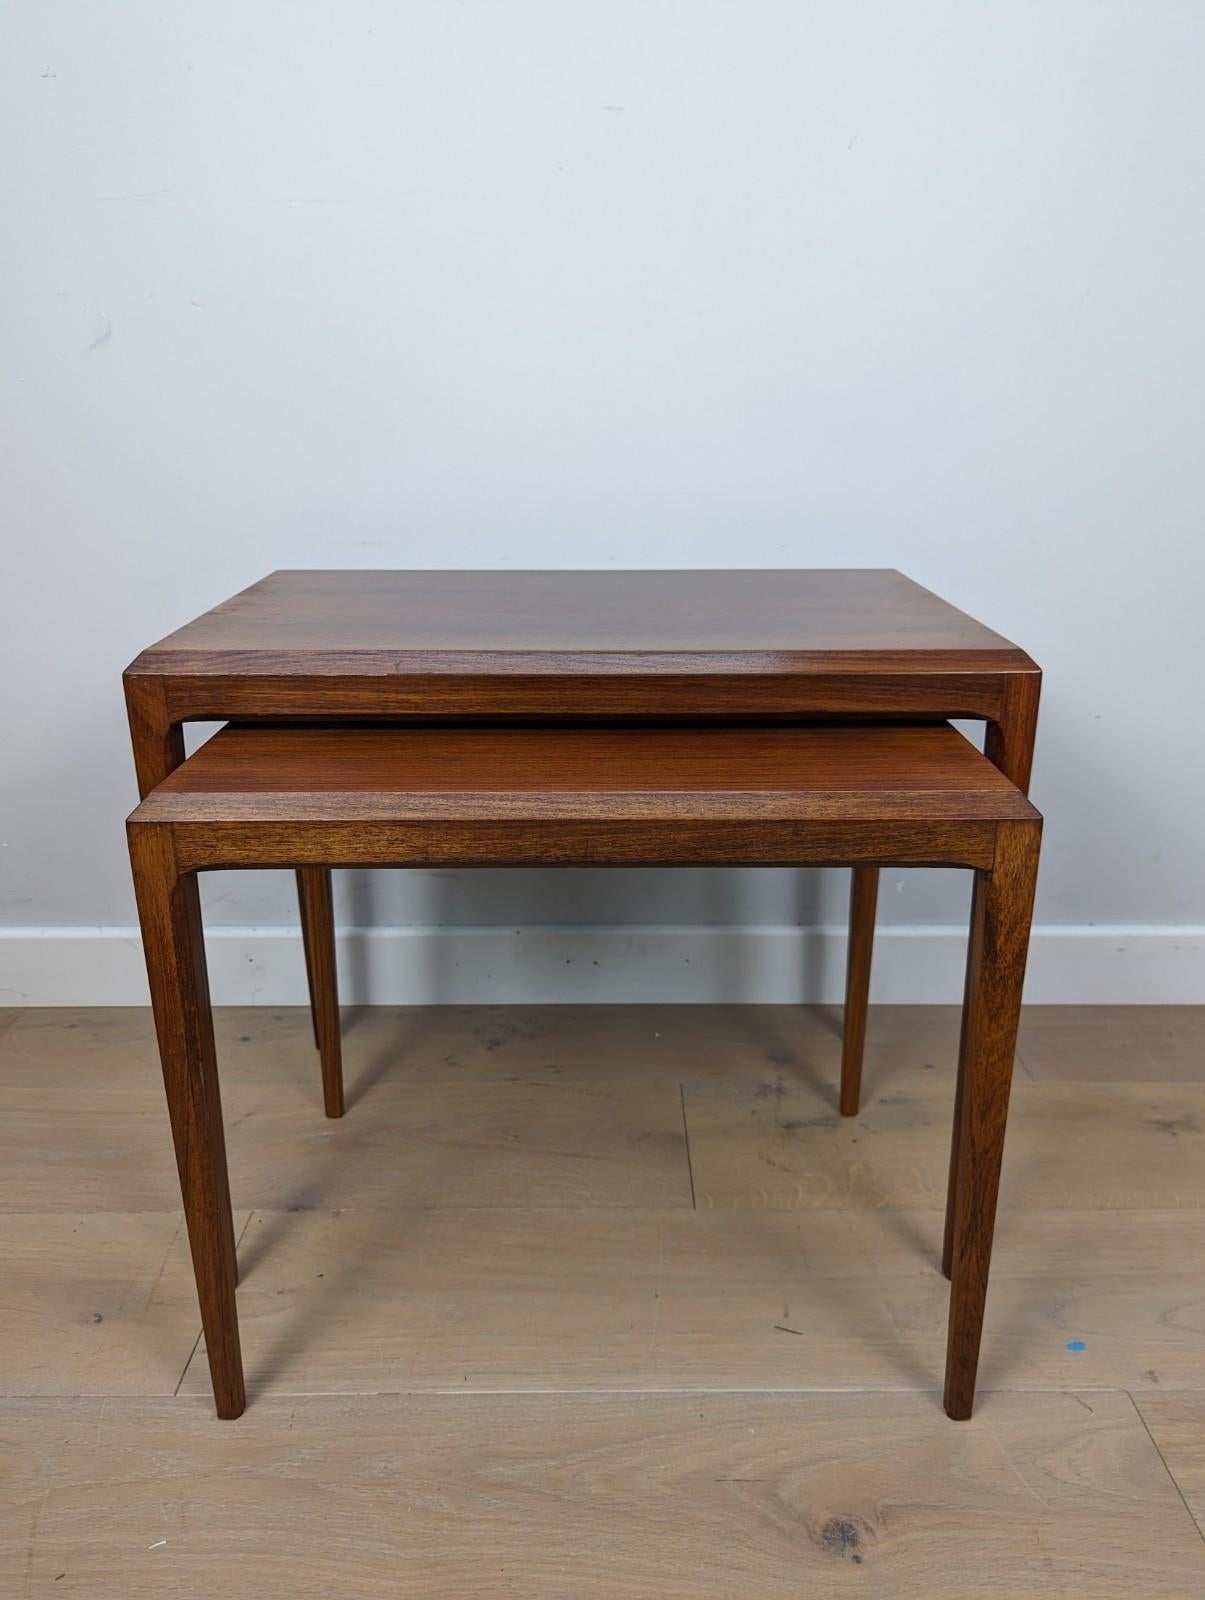 A pair Danish mid-century nesting tables made in rosewood and designed by Johannes Andersen for Silkeborg.

This was originally part of a set of three with the small table containing the labels, however this is unmistakably Johannes